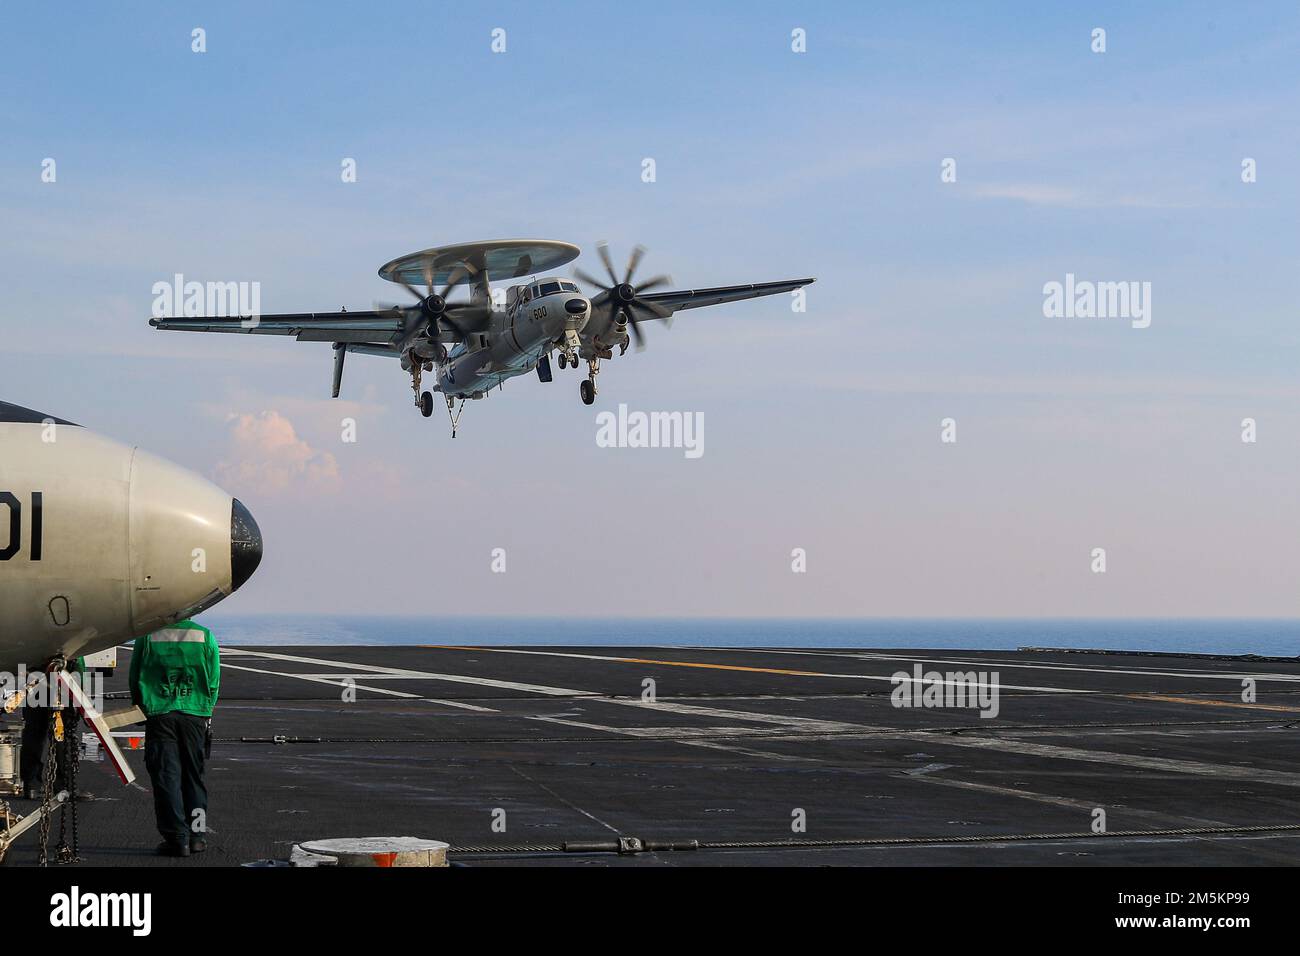 SOUTH CHINA SEA (March 23, 2022) An E-2D Hawkeye, assigned to the 'Wallbangers' of Carrier Airborne Early Warning Squadron (VAW) 117, prepares to make an arrested landing on the flight deck of the Nimitz-class aircraft carrier USS Abraham Lincoln (CVN 72). Abraham Lincoln Strike Group is on a scheduled deployment in the U.S. 7th Fleet area of operations to enhance interoperability through alliances and partnerships while serving as a ready-response force in support of a free and open Indo-Pacific region. Stock Photo